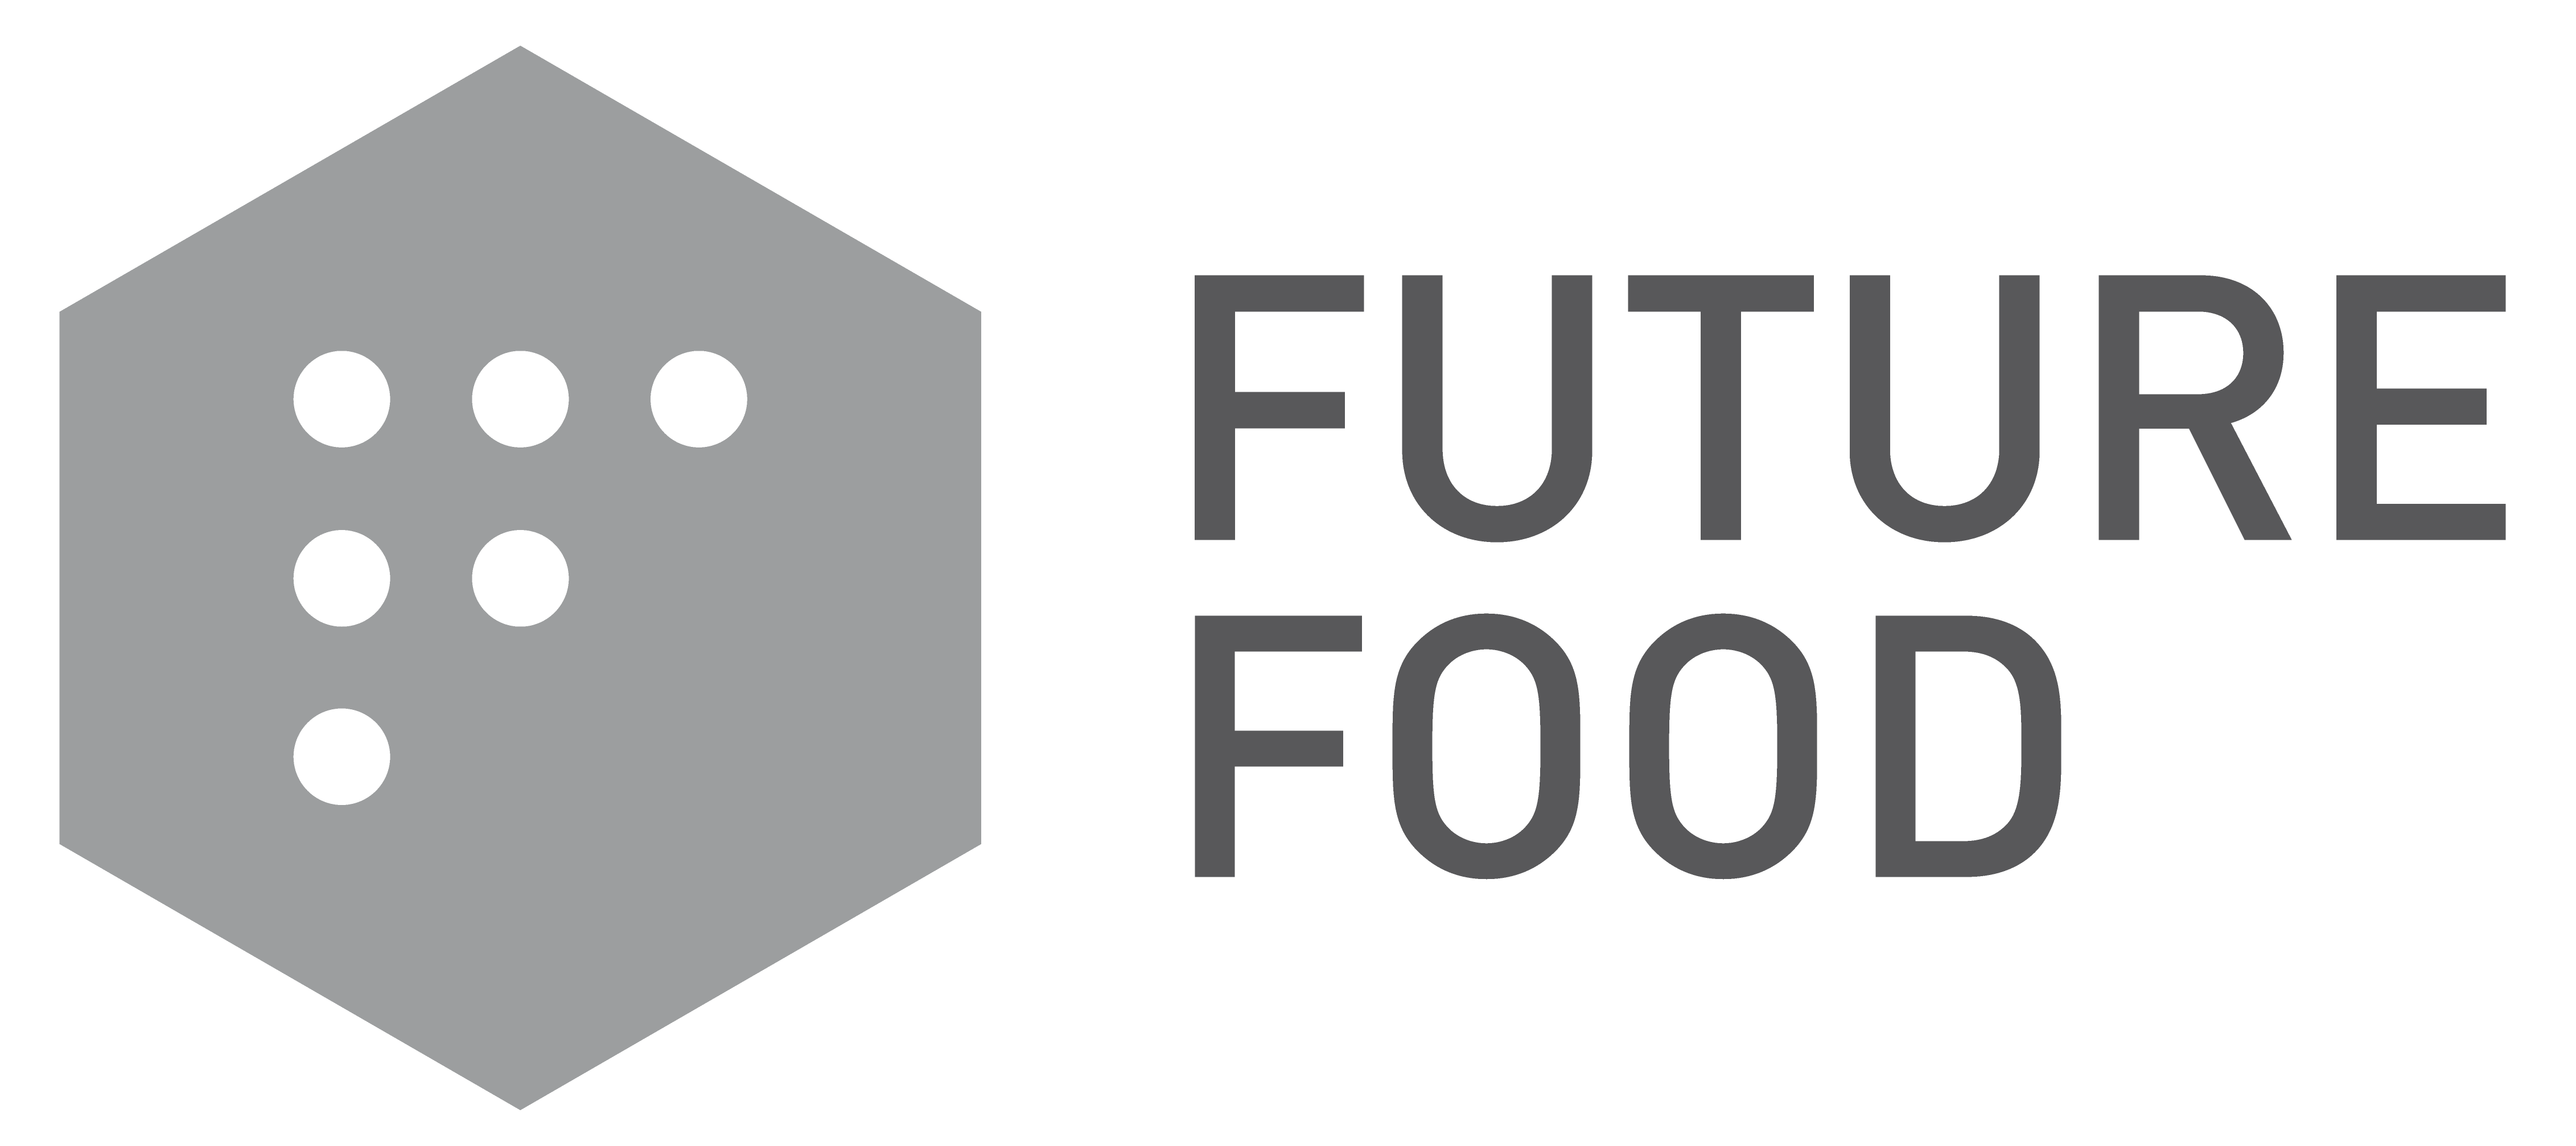 Black Anf White Food Logo - About - FUTURE.FOOD